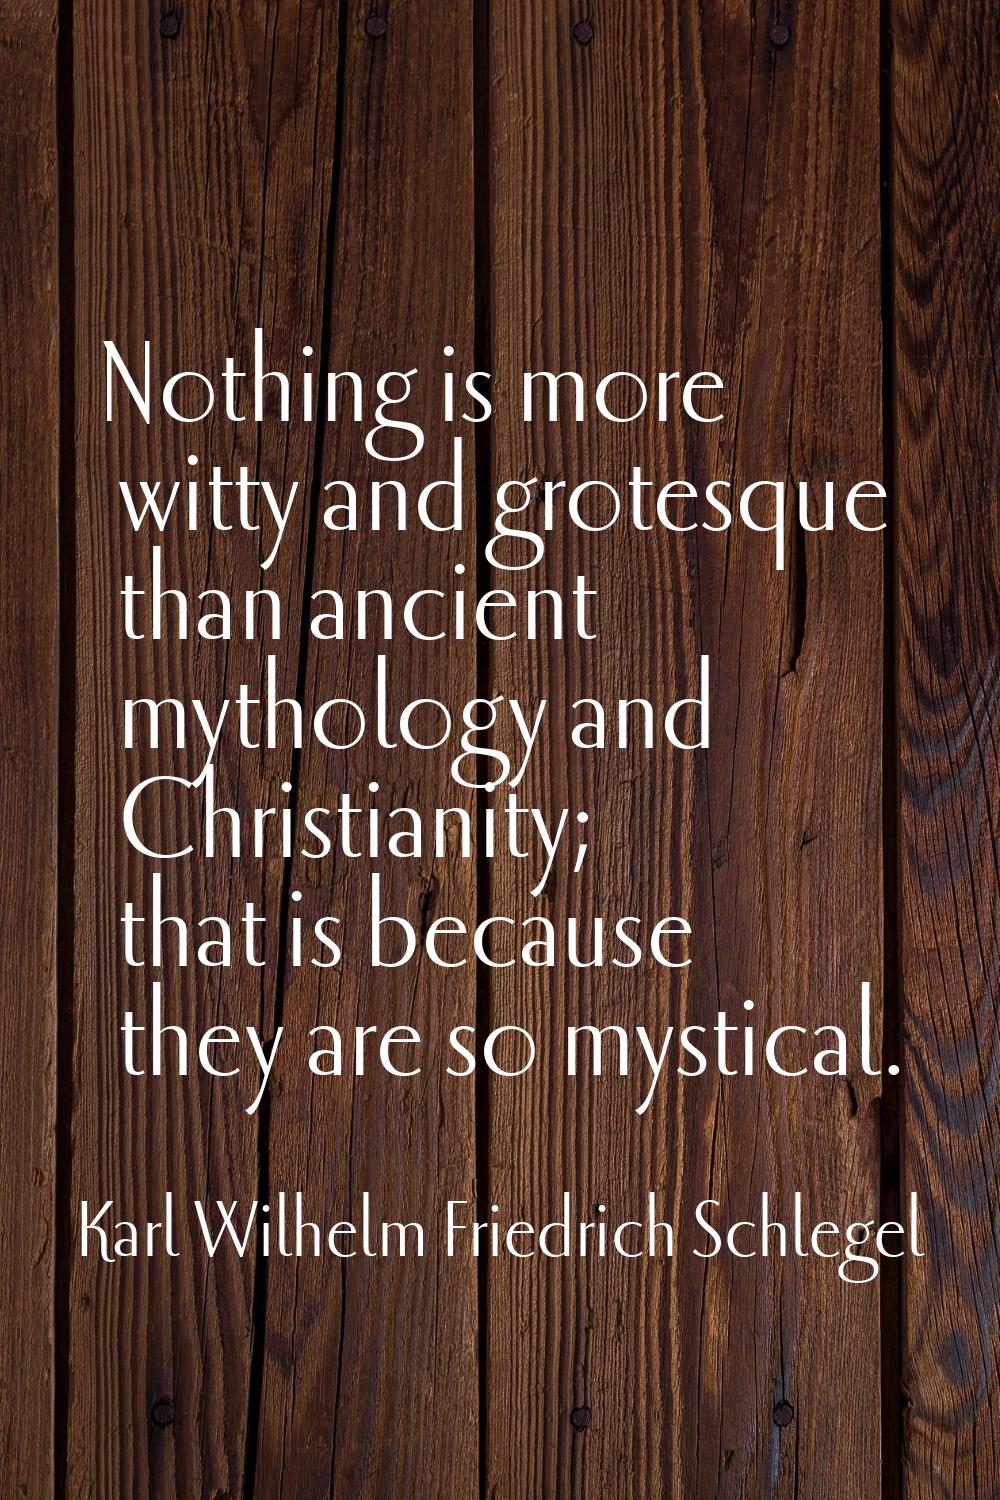 Nothing is more witty and grotesque than ancient mythology and Christianity; that is because they a